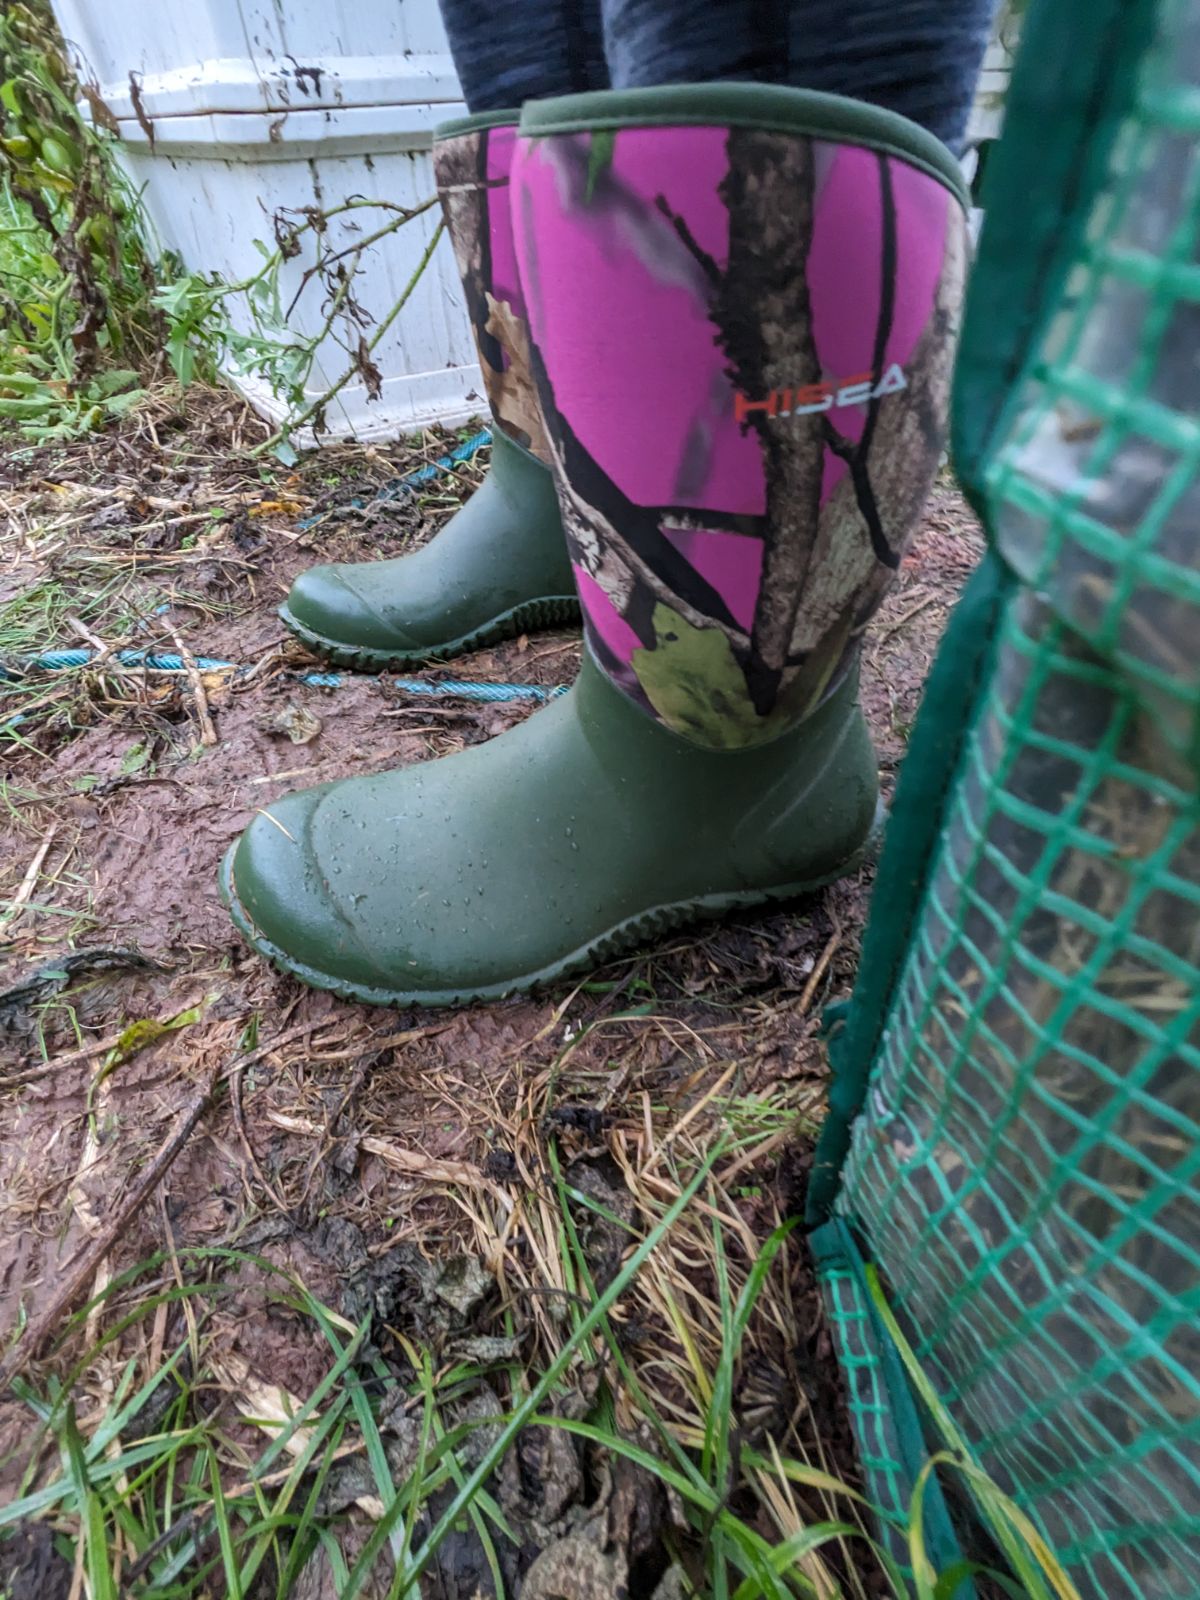 Garden boots in a mud mess with tomato vines in raised beds